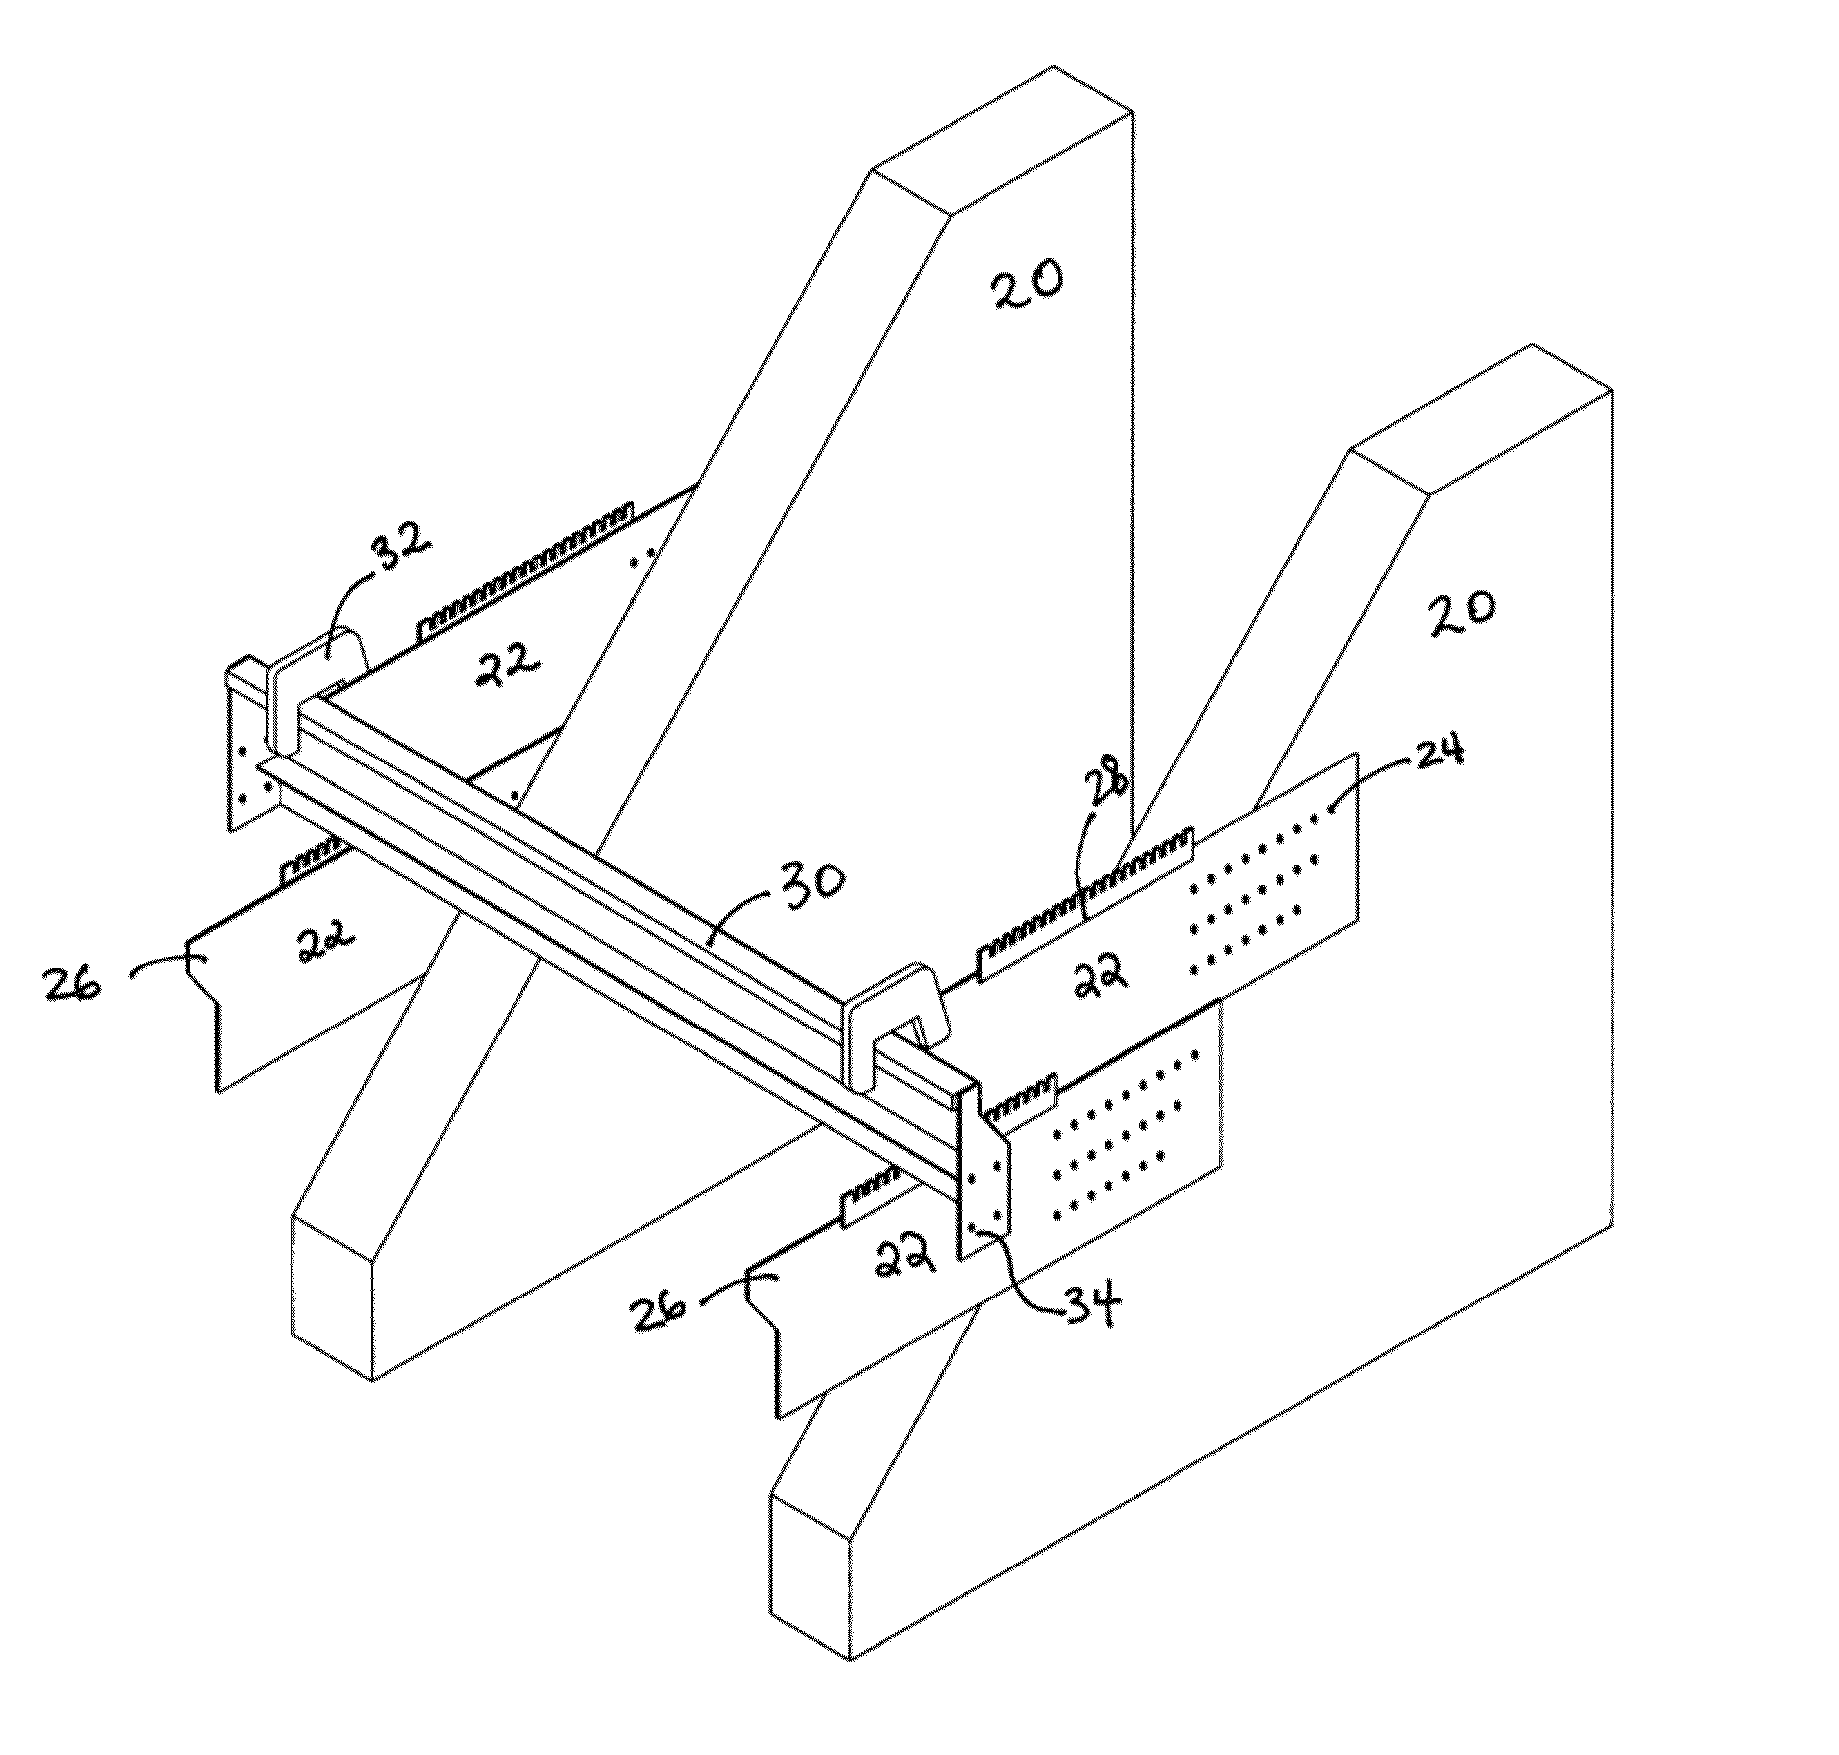 System for building formwork for concrete stairs and related methods